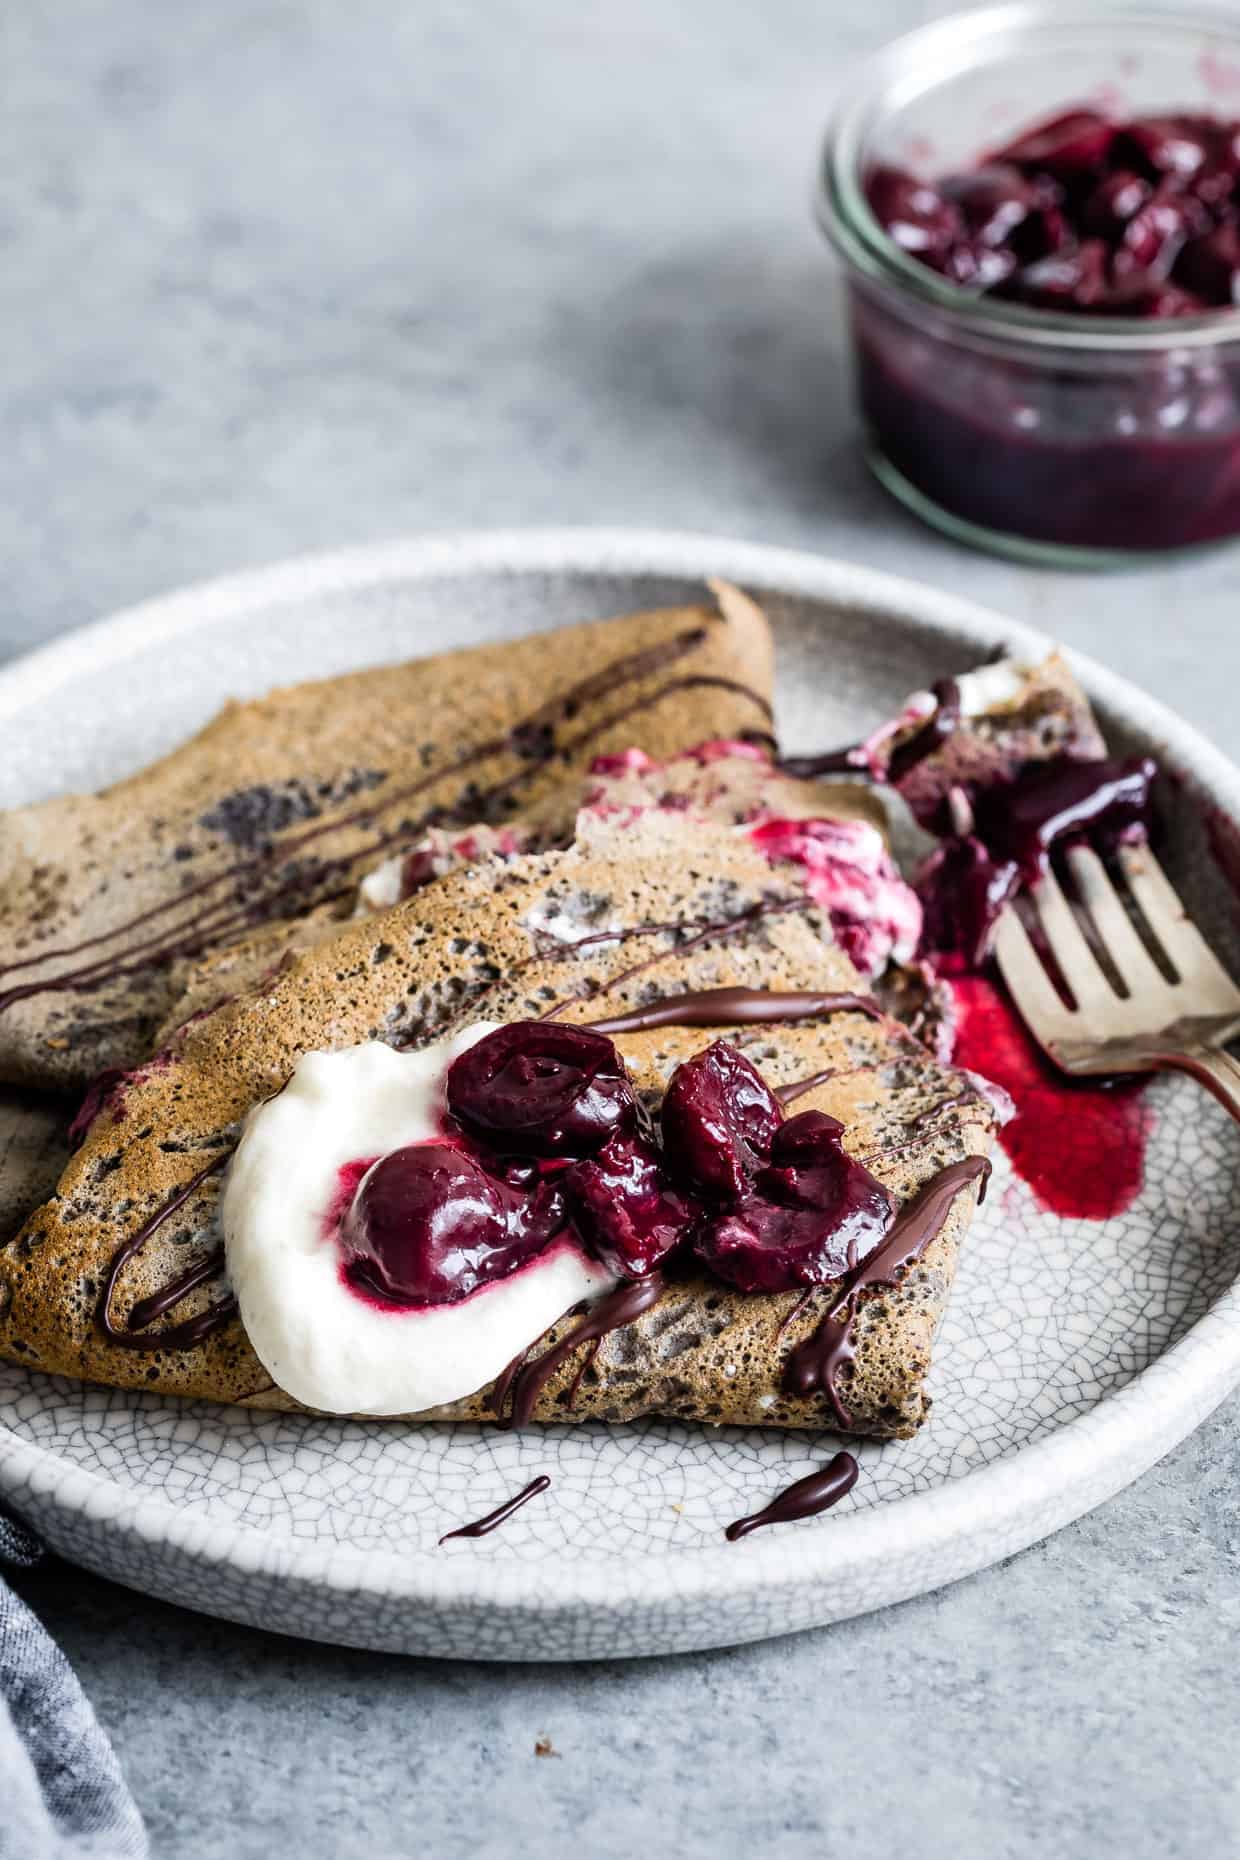 Buckwheat Crepes with Roasted Cherries, Whipped Cream, and Chocolate